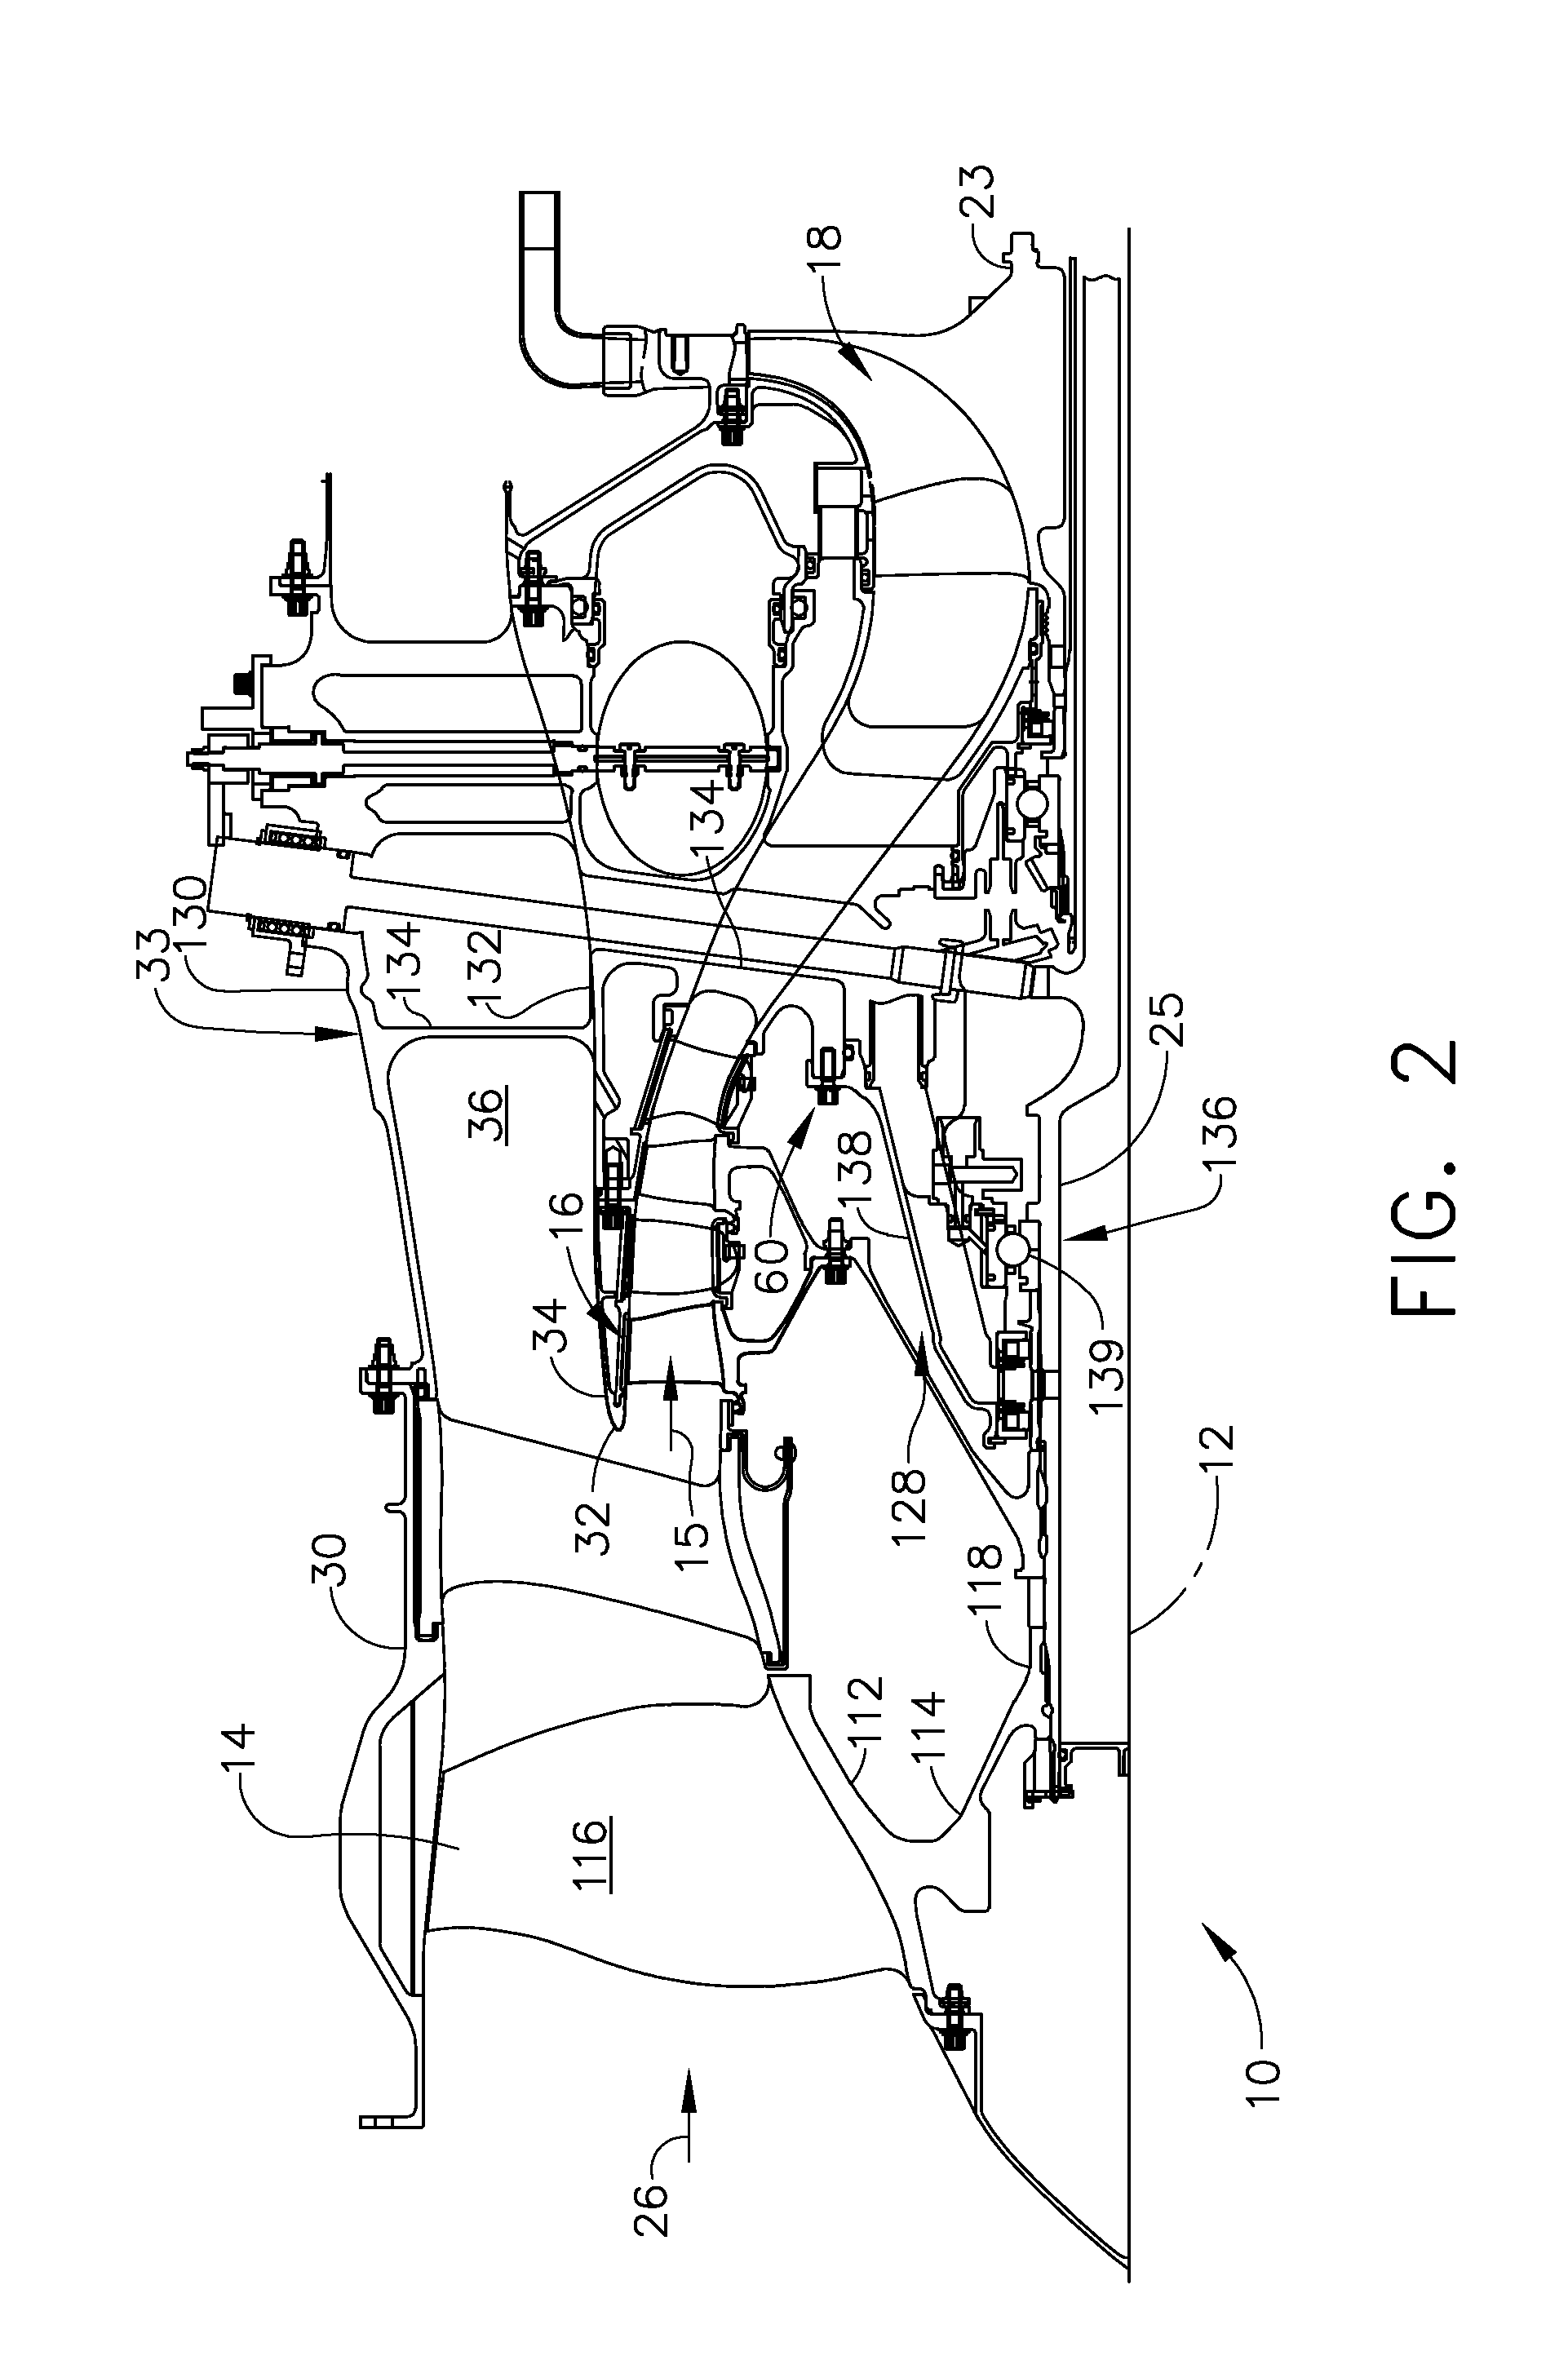 Dynamic load reduction system